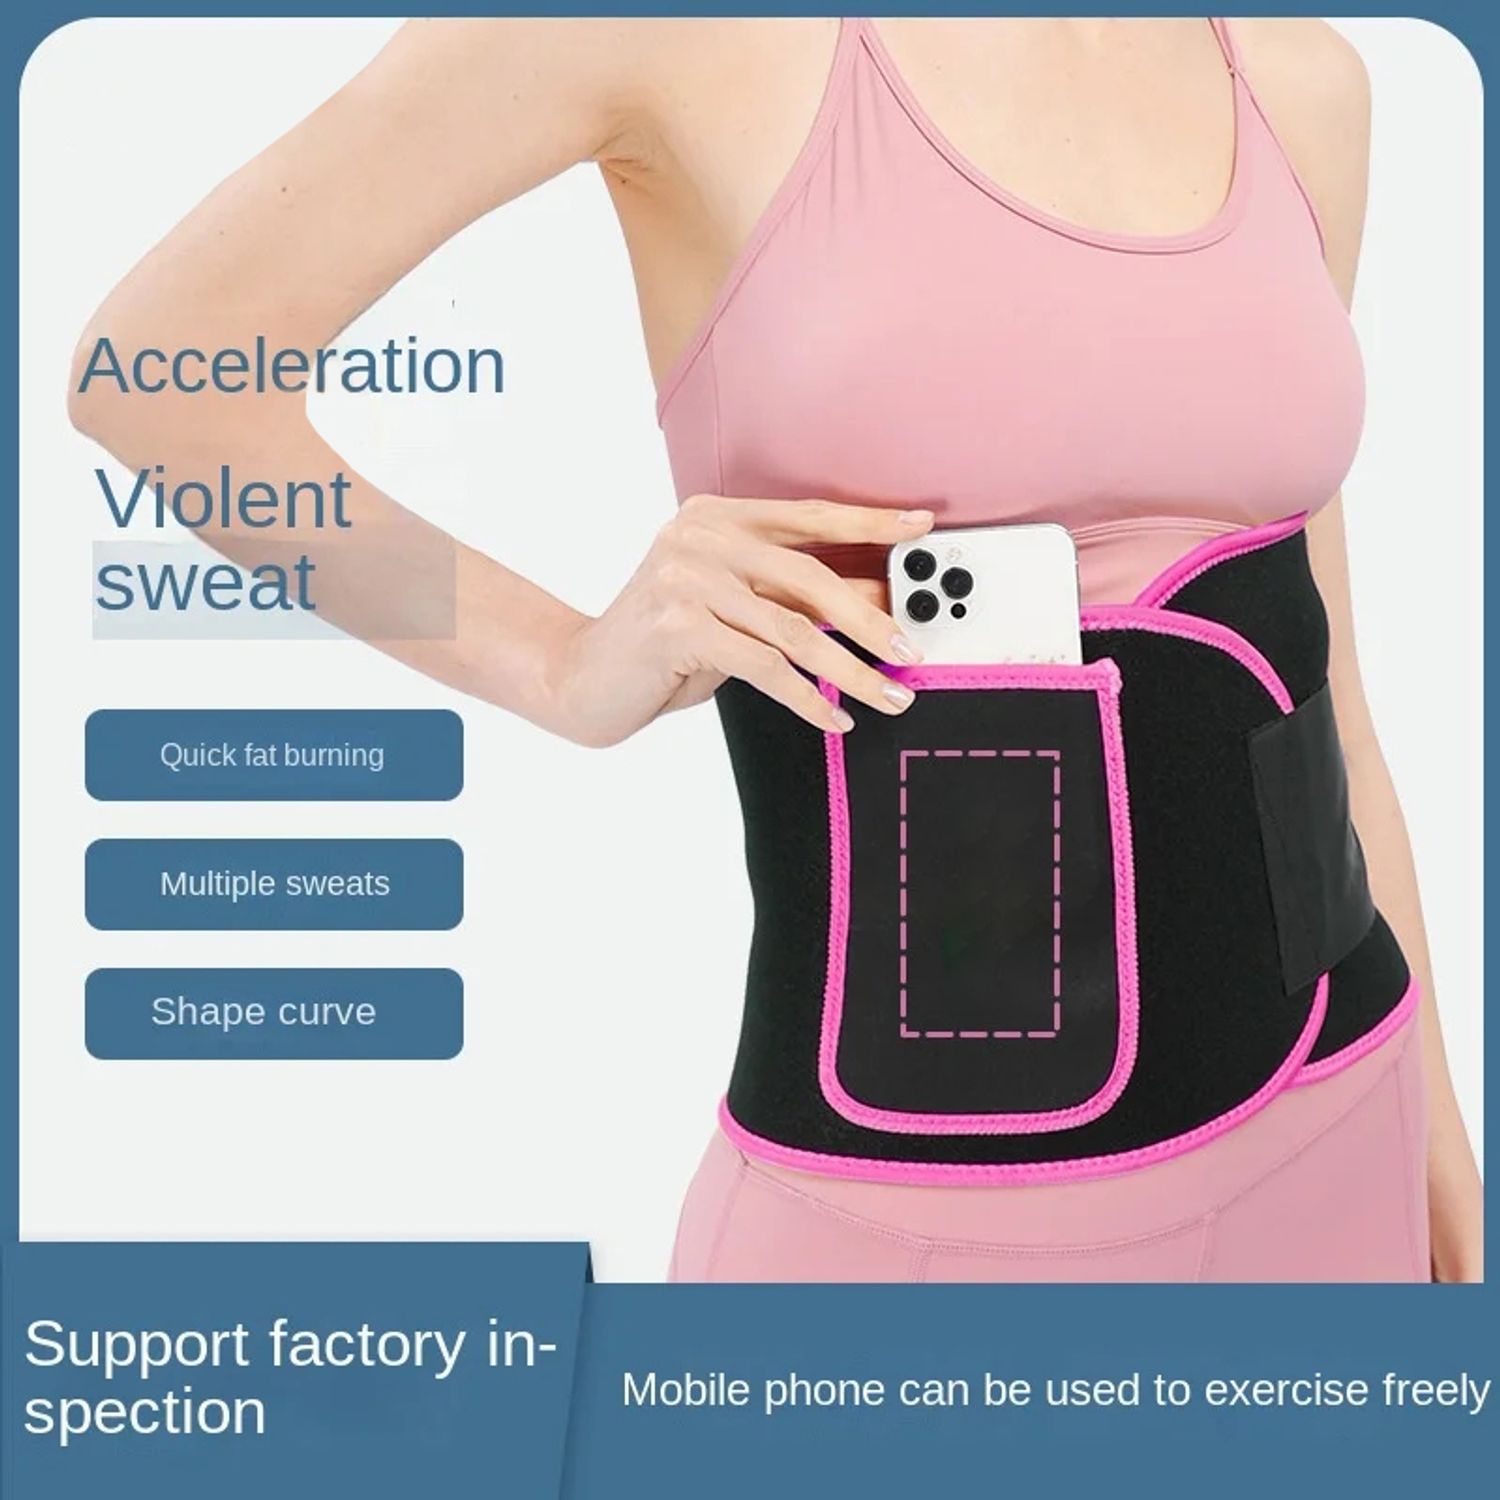 Neoprene Waist Trimmer with pocket making mobile phone can be used to exercise freely